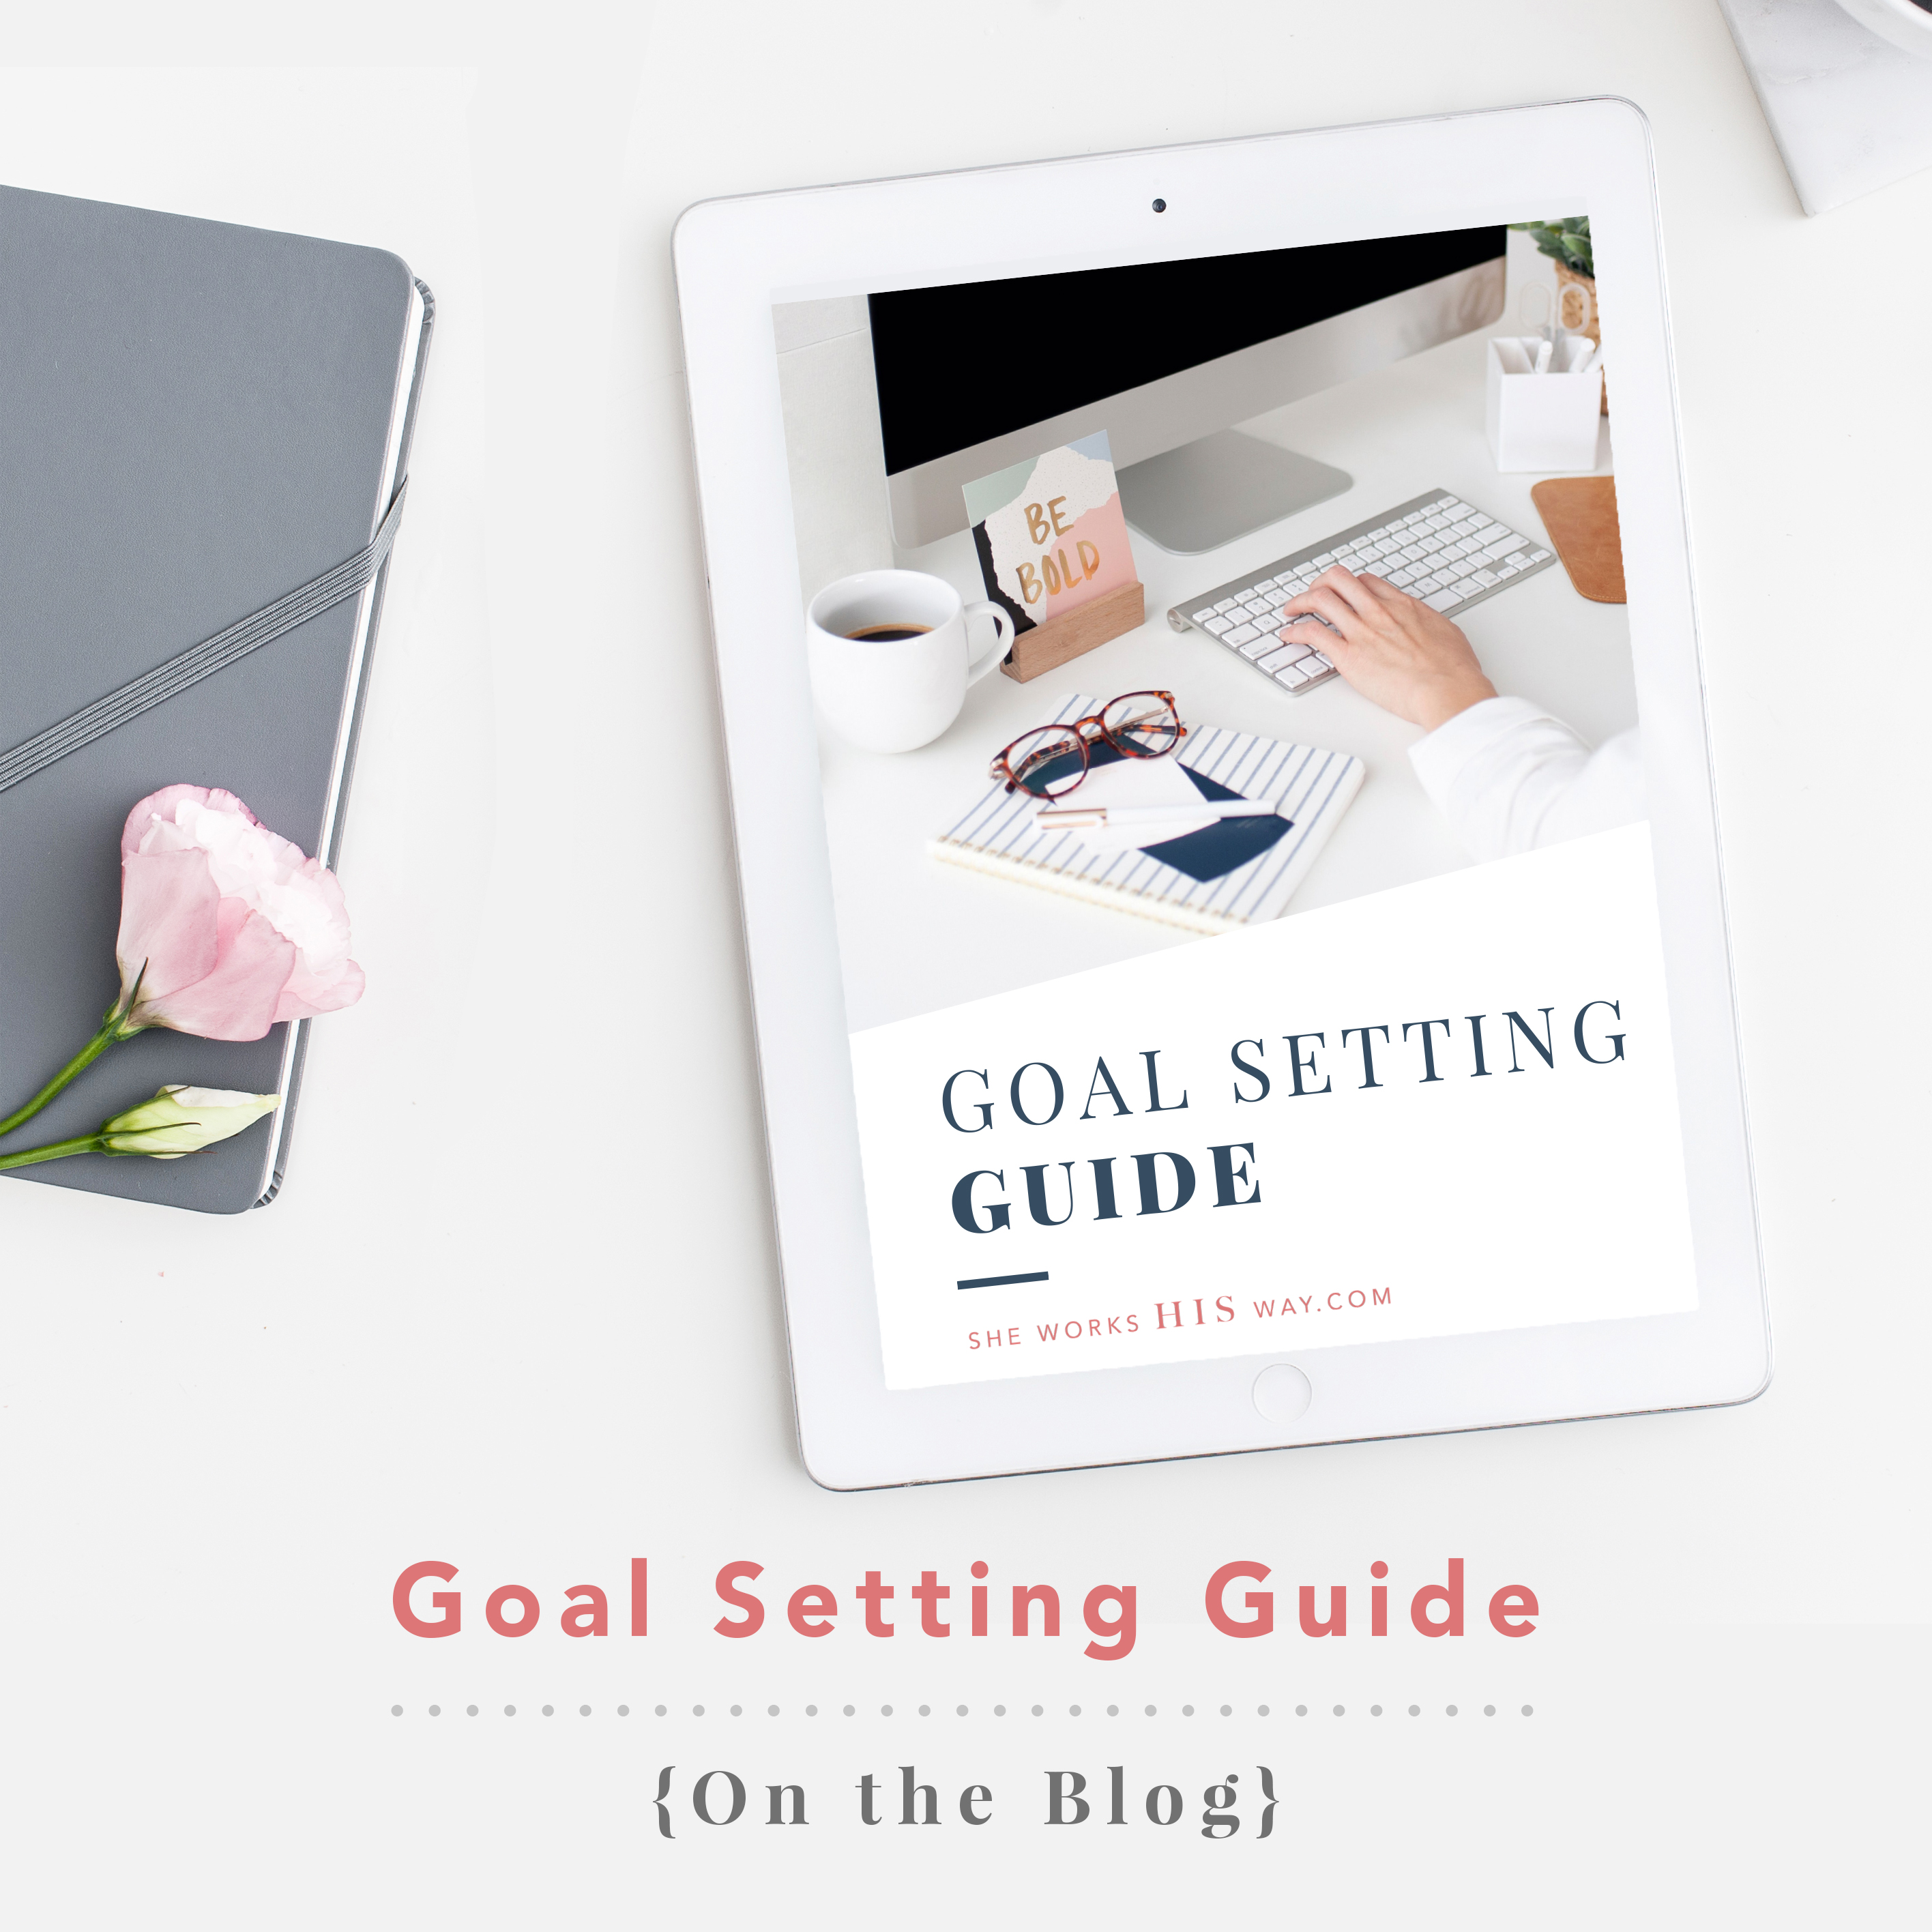 Eight Questions to Evaluate the Effectiveness of Your Goals – She Works HIS Way